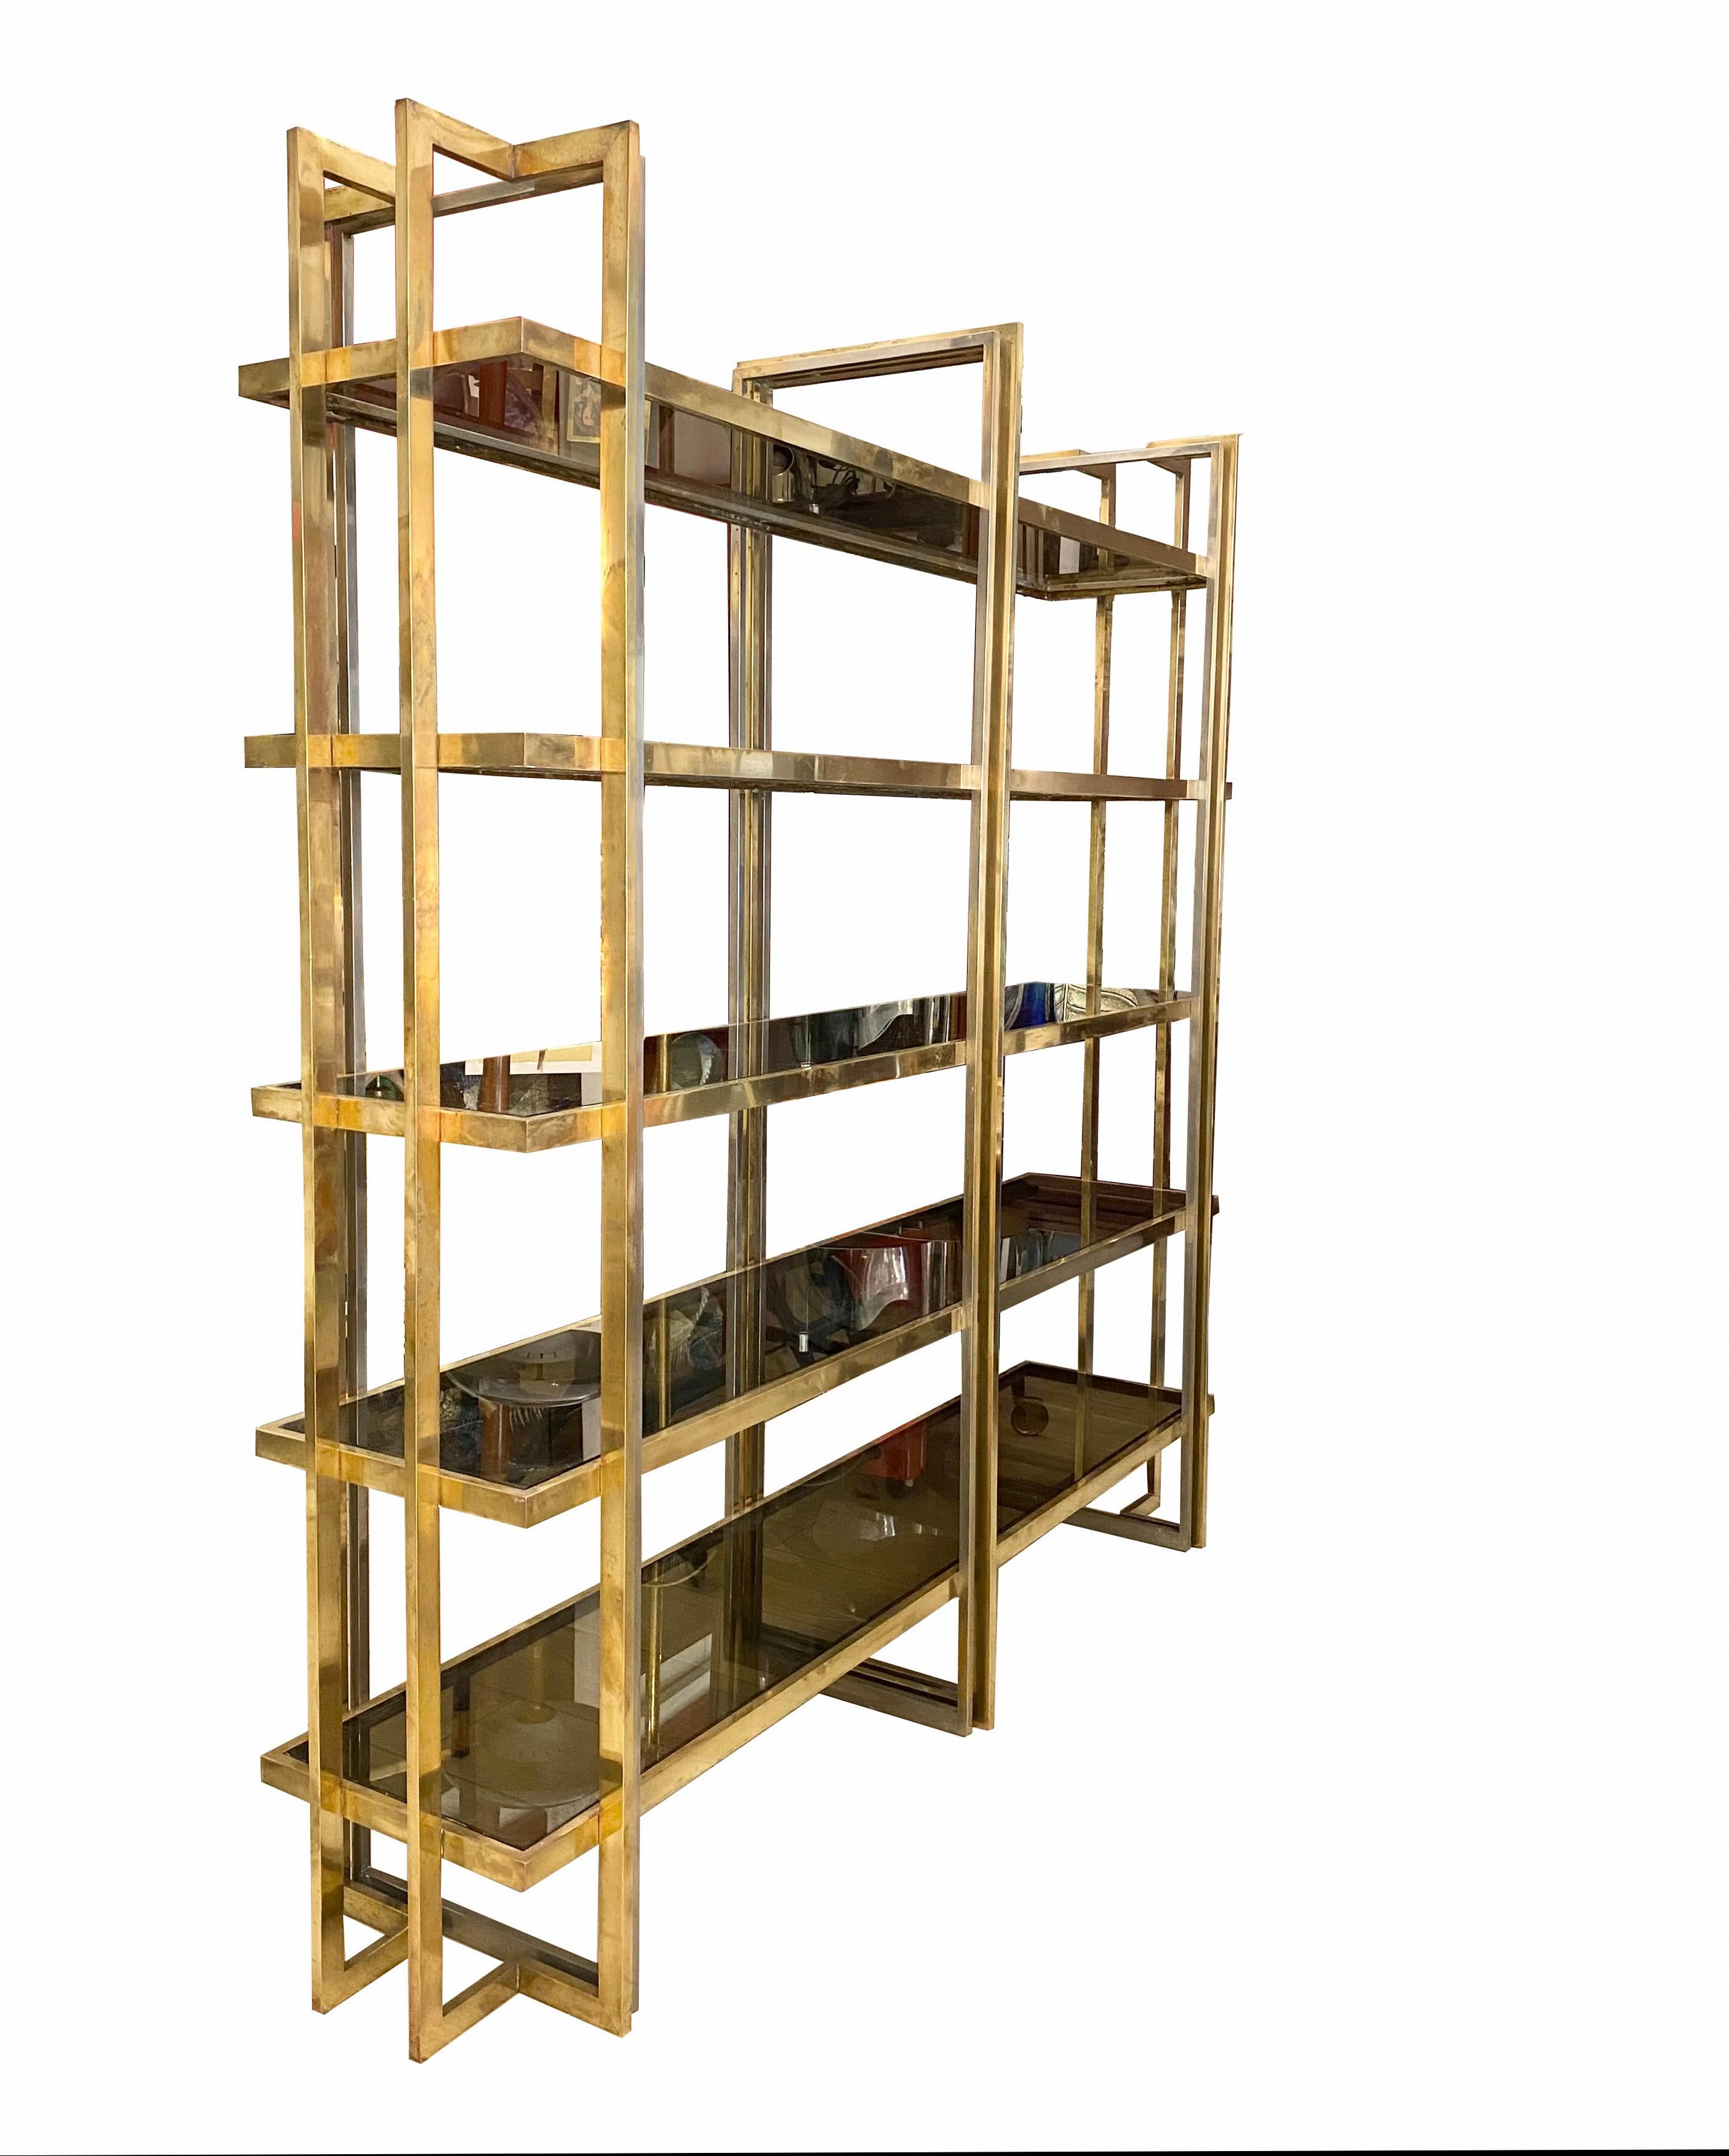 This brass etegere was designed and manufactured in Italy by Romeo Rega in 1976. It is embellished with an important detail: the structure is made of original smoked glass shelves in perfect condition. The shape of the shelving is designed to offer